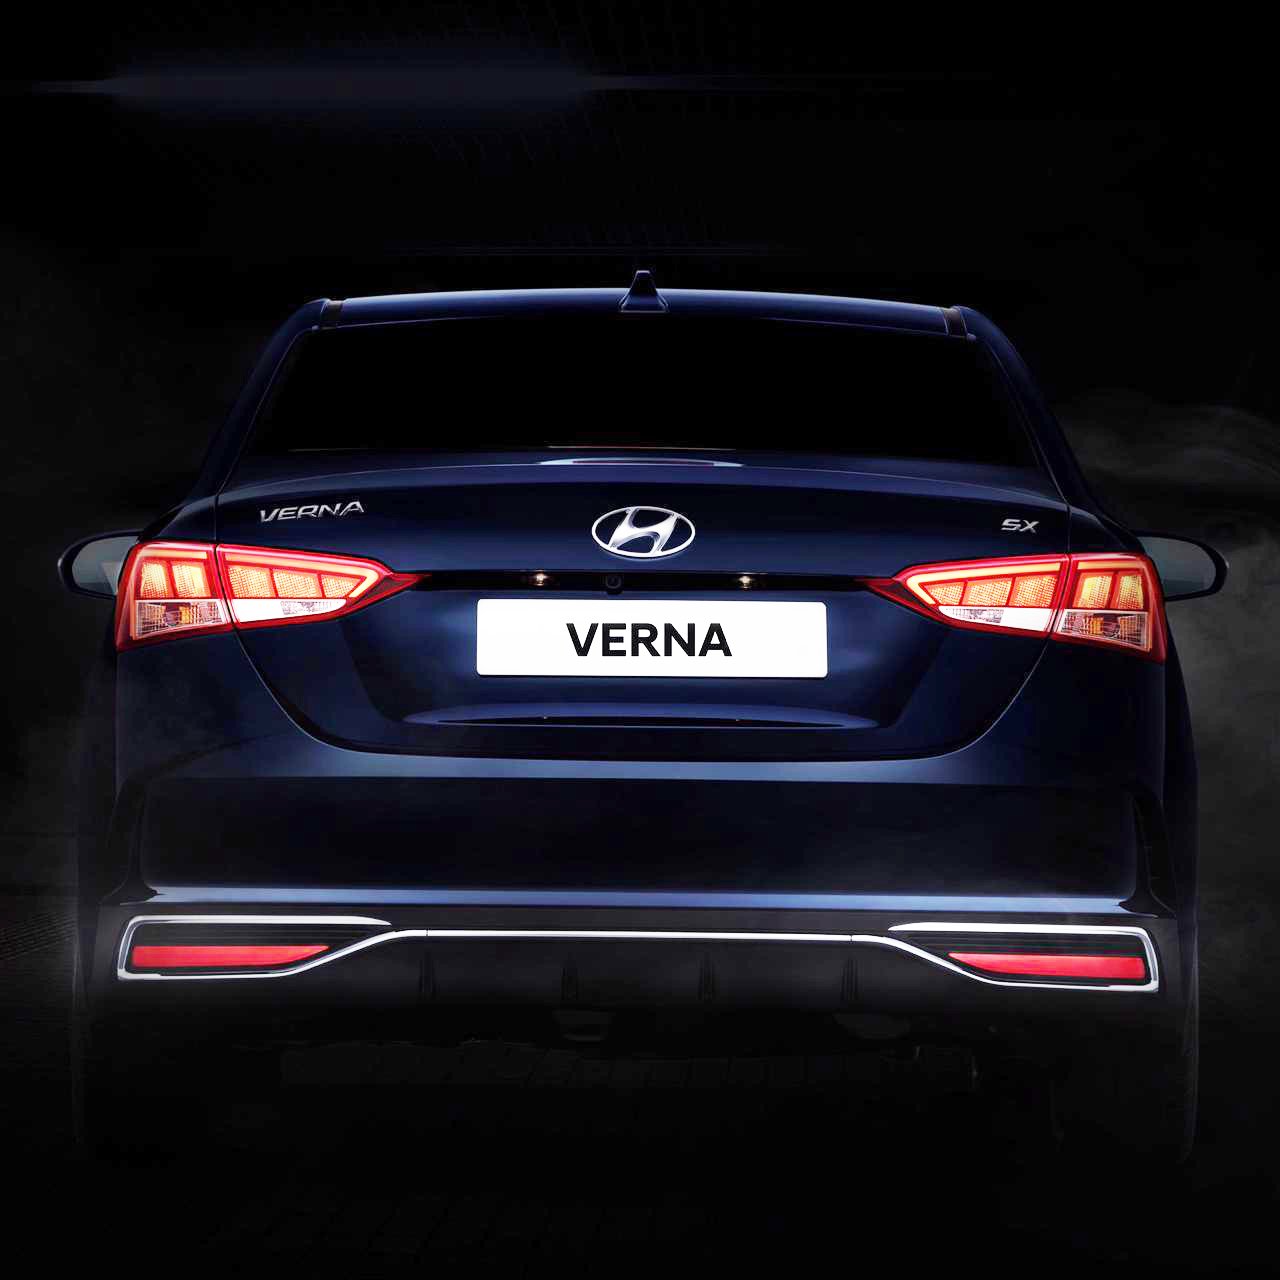 2020 Hyundai Verna Facelift Gets 1.0L Turbo Petrol with 7-DCT, Almost Revealed Thru Official Pics